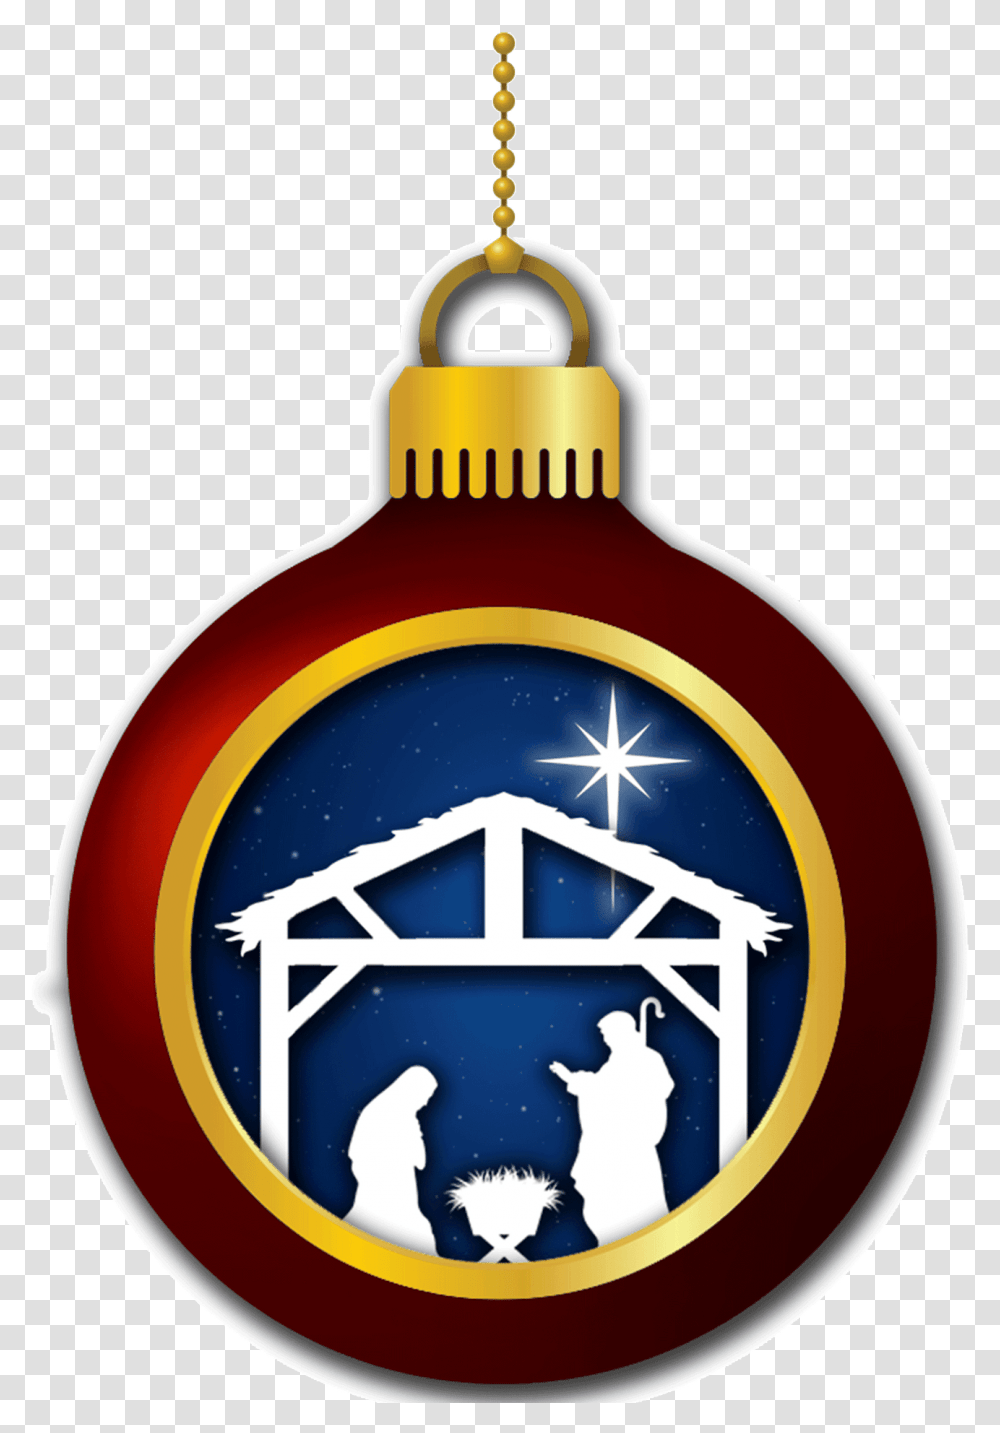 Nativity Scene Clipart, Lighting, Fire Hydrant, Label Transparent Png